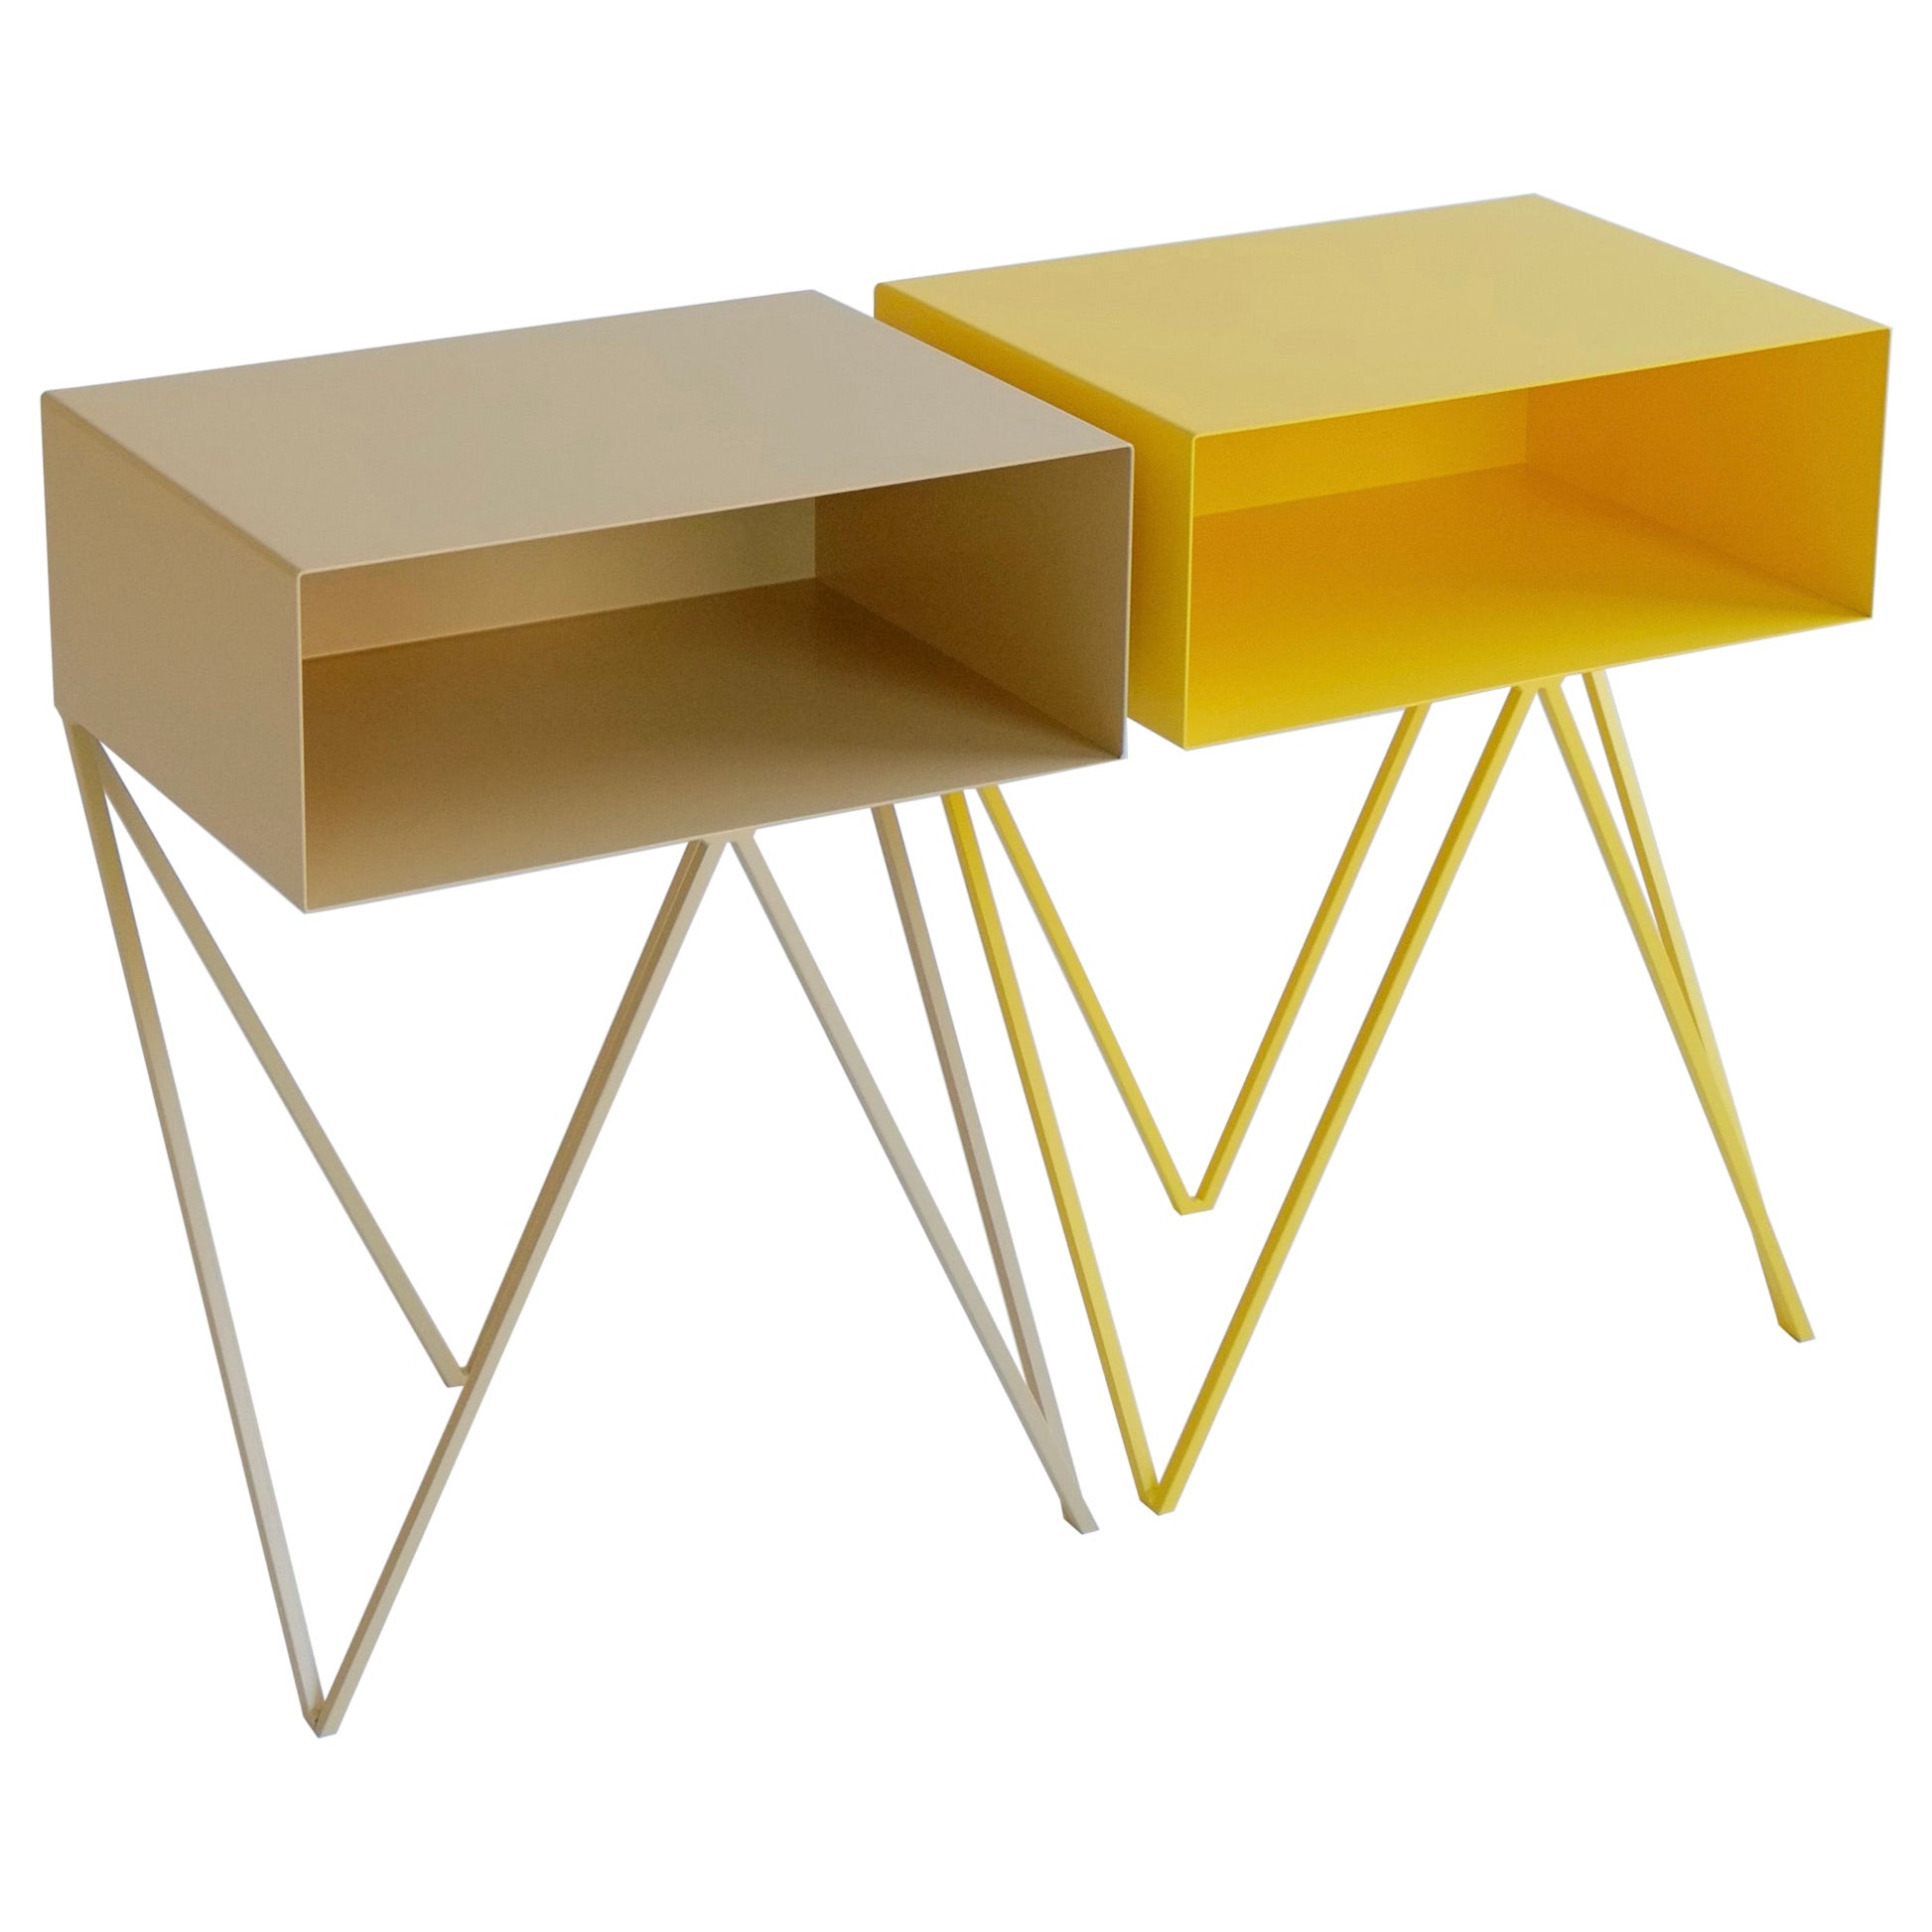 Pair of Mismatched Yellow and Butternut Robot Bedside Tables - Nightstands For Sale